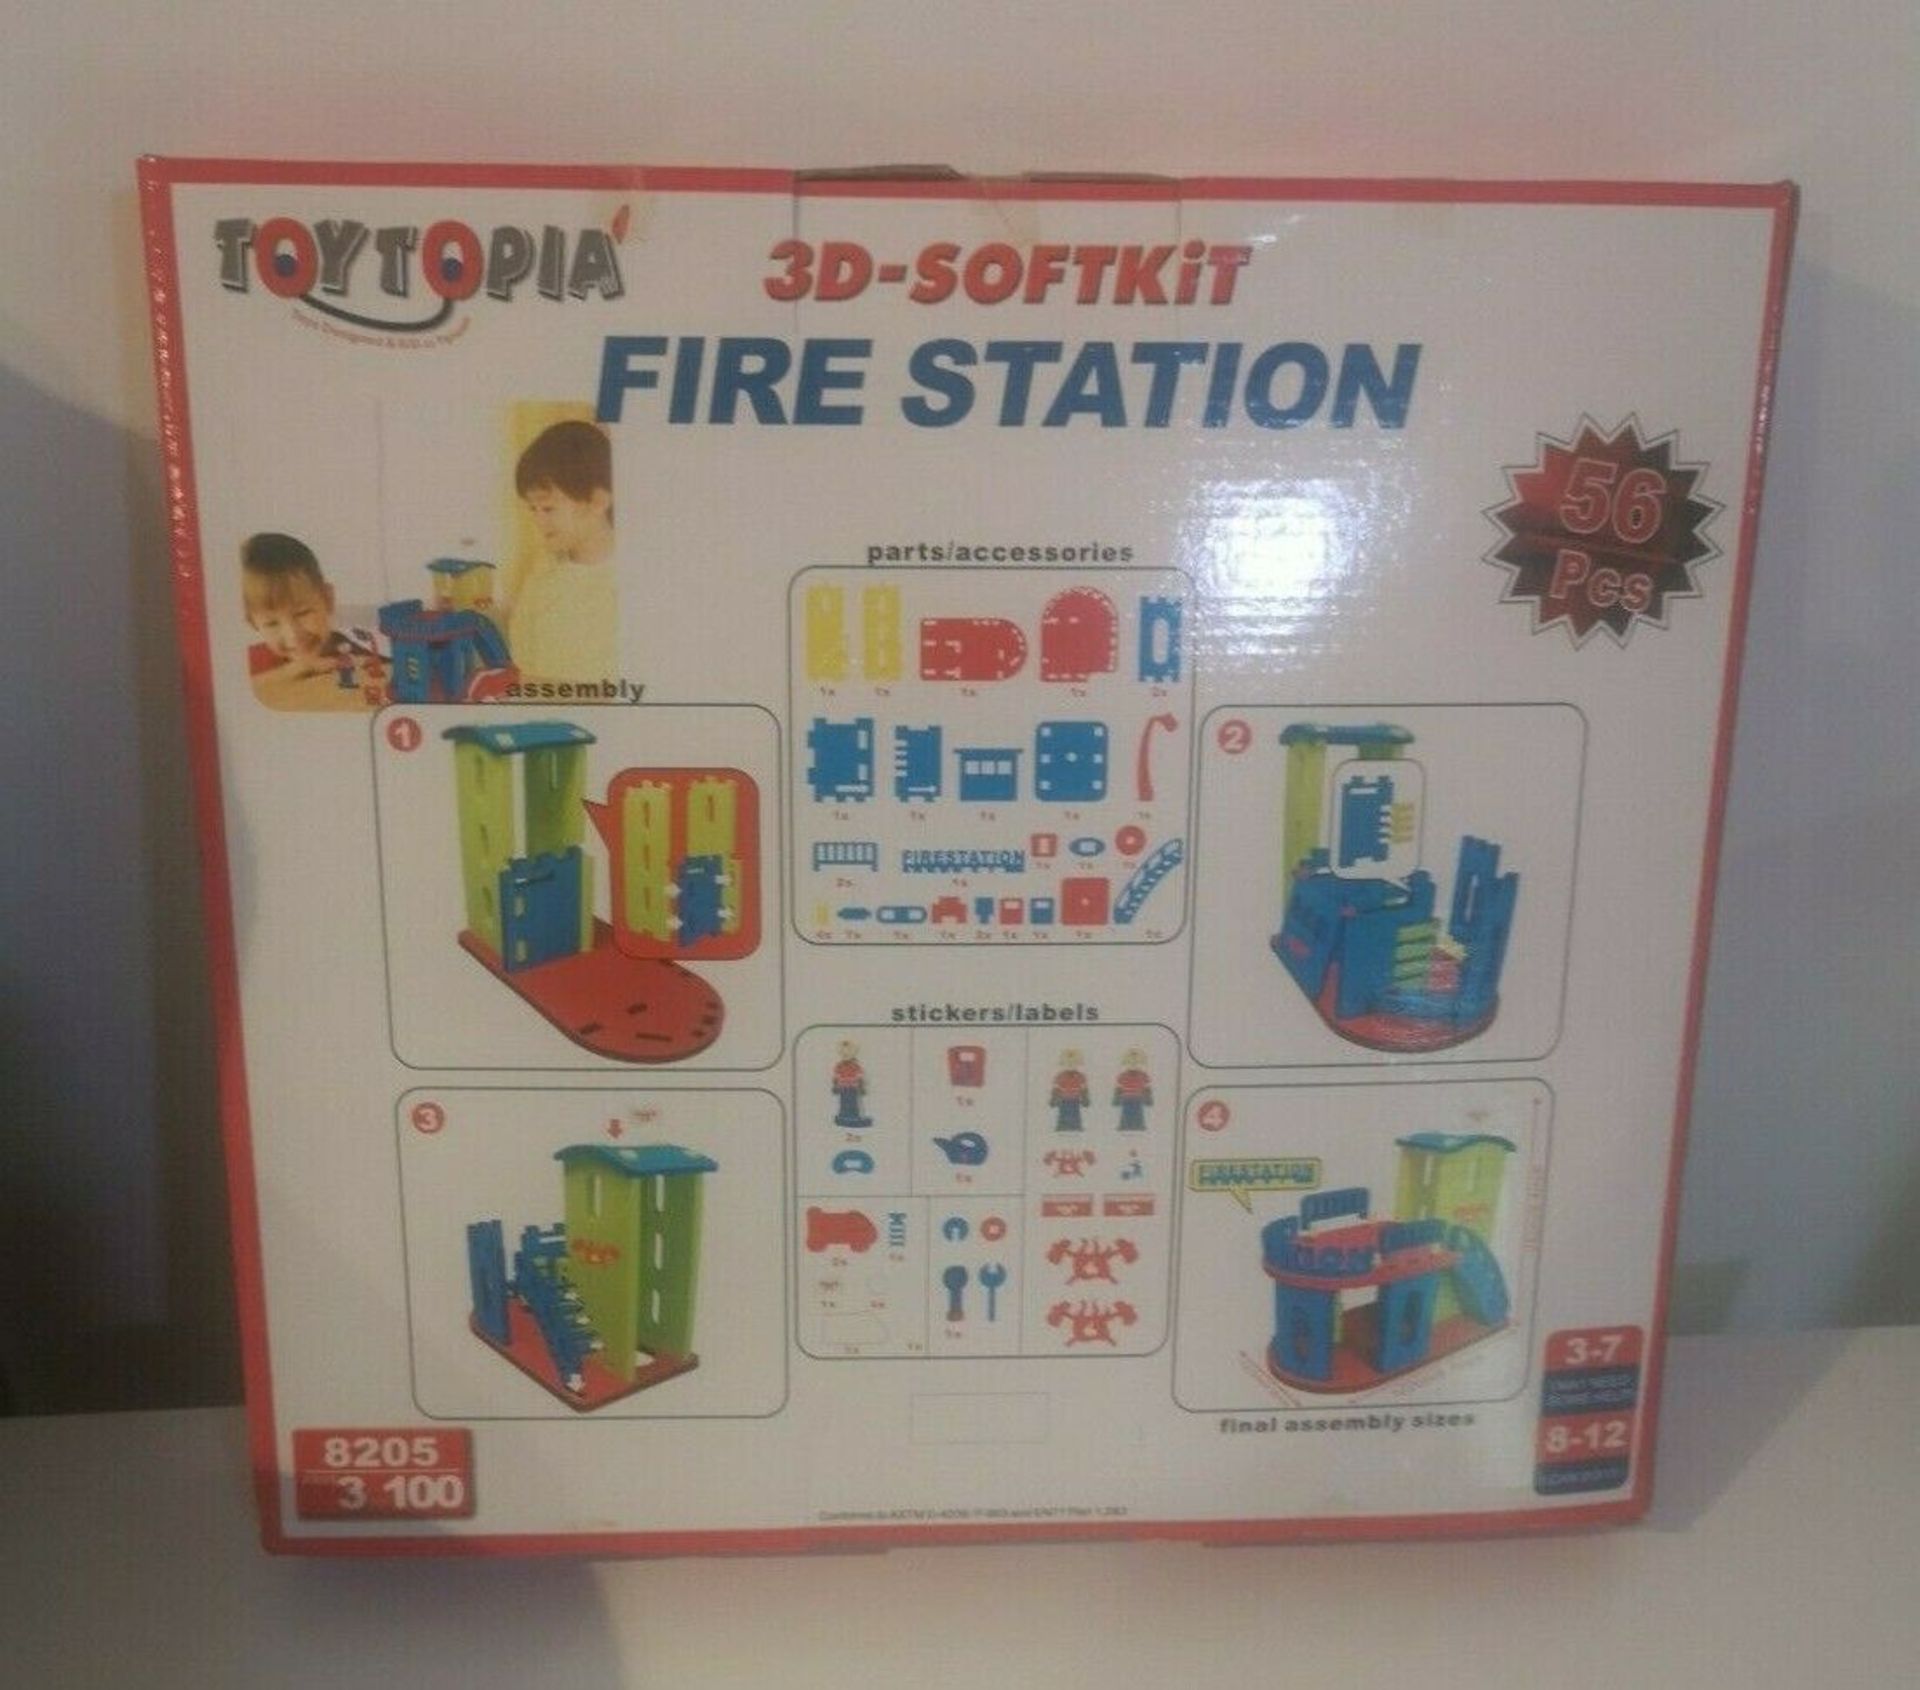 Toytopia 3D Softkit Fire Station - 56 Piece Play Set - Image 2 of 4